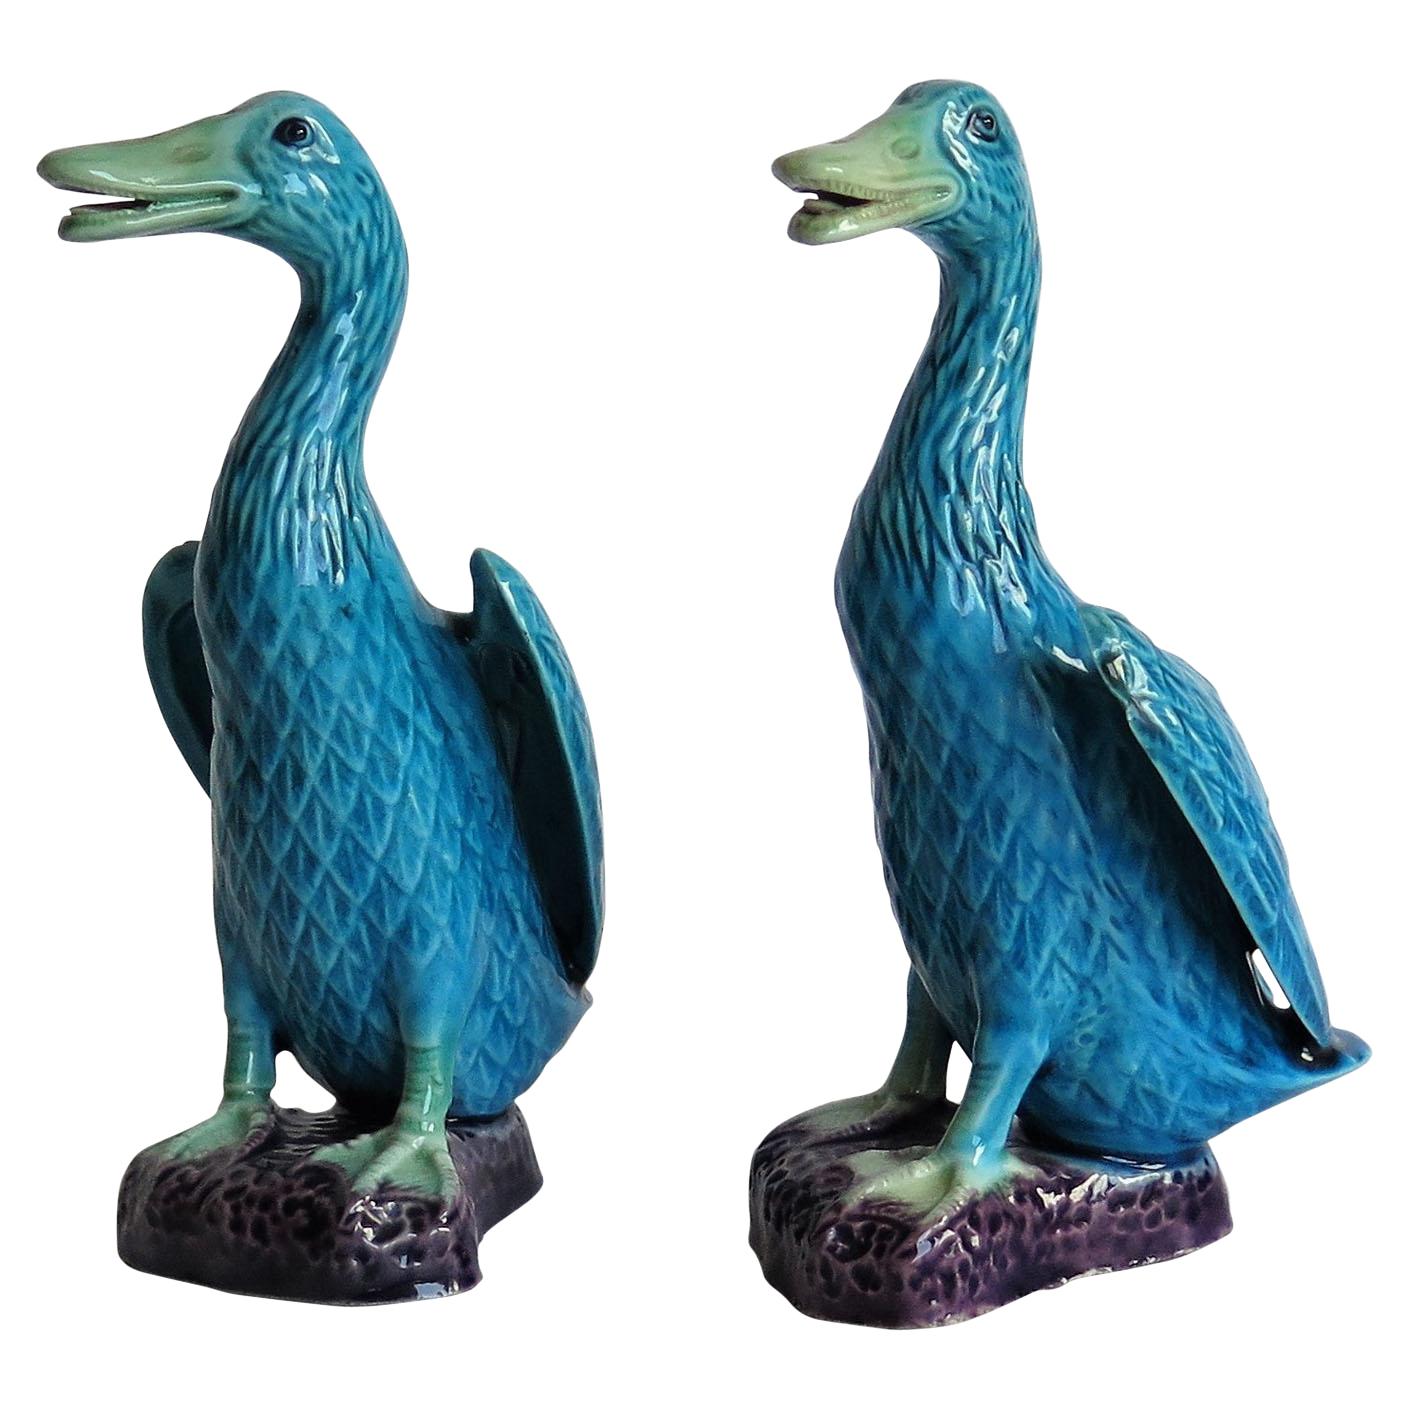 Two Chinese Export Porcelain Geese or Goose Bird Figurines in Poychrome Enamels